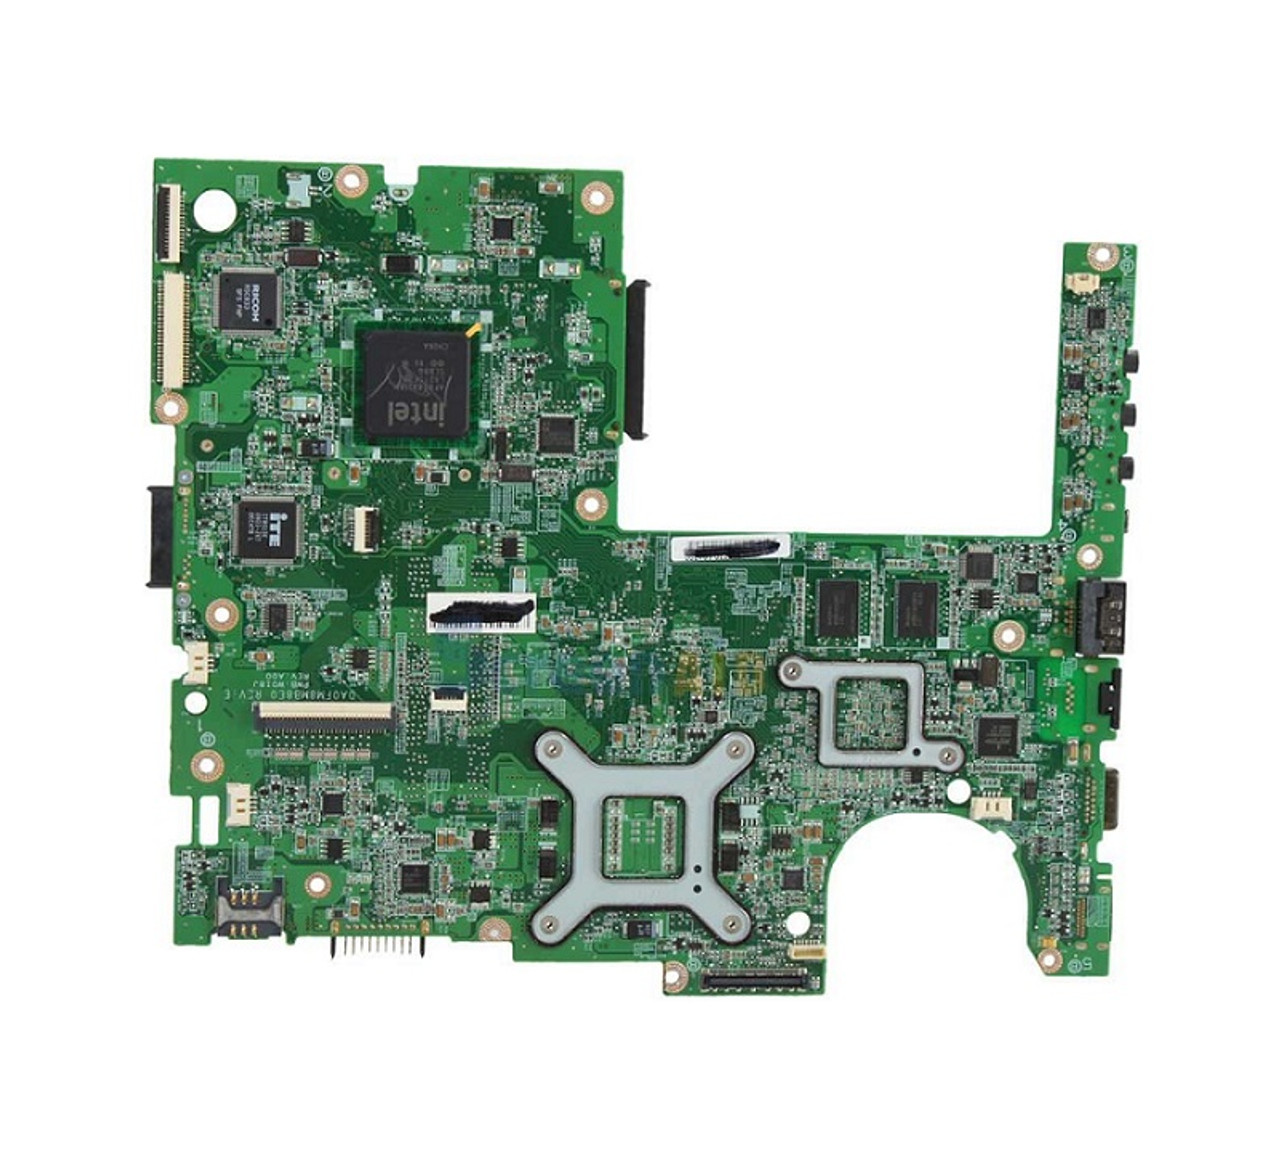 0DHVYJ - Dell System Board (Motherboard) Core i7 2.8GHz (i7-2640M) with CPU for Latitude E6320 (Refurbished)